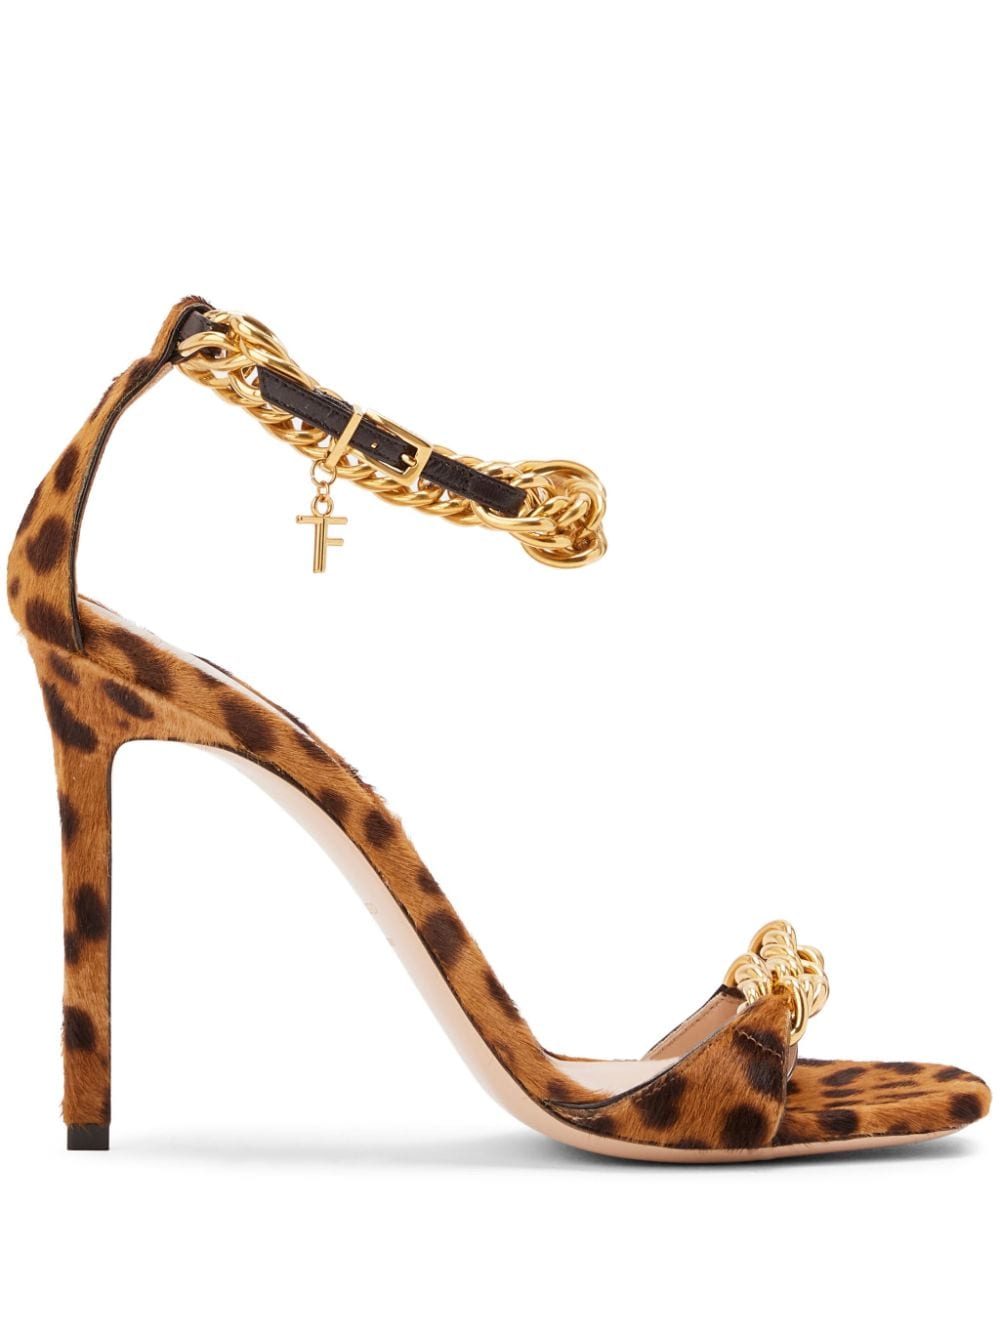 Tom Ford Zenith 105mm Calf-hair Sandals In Brown